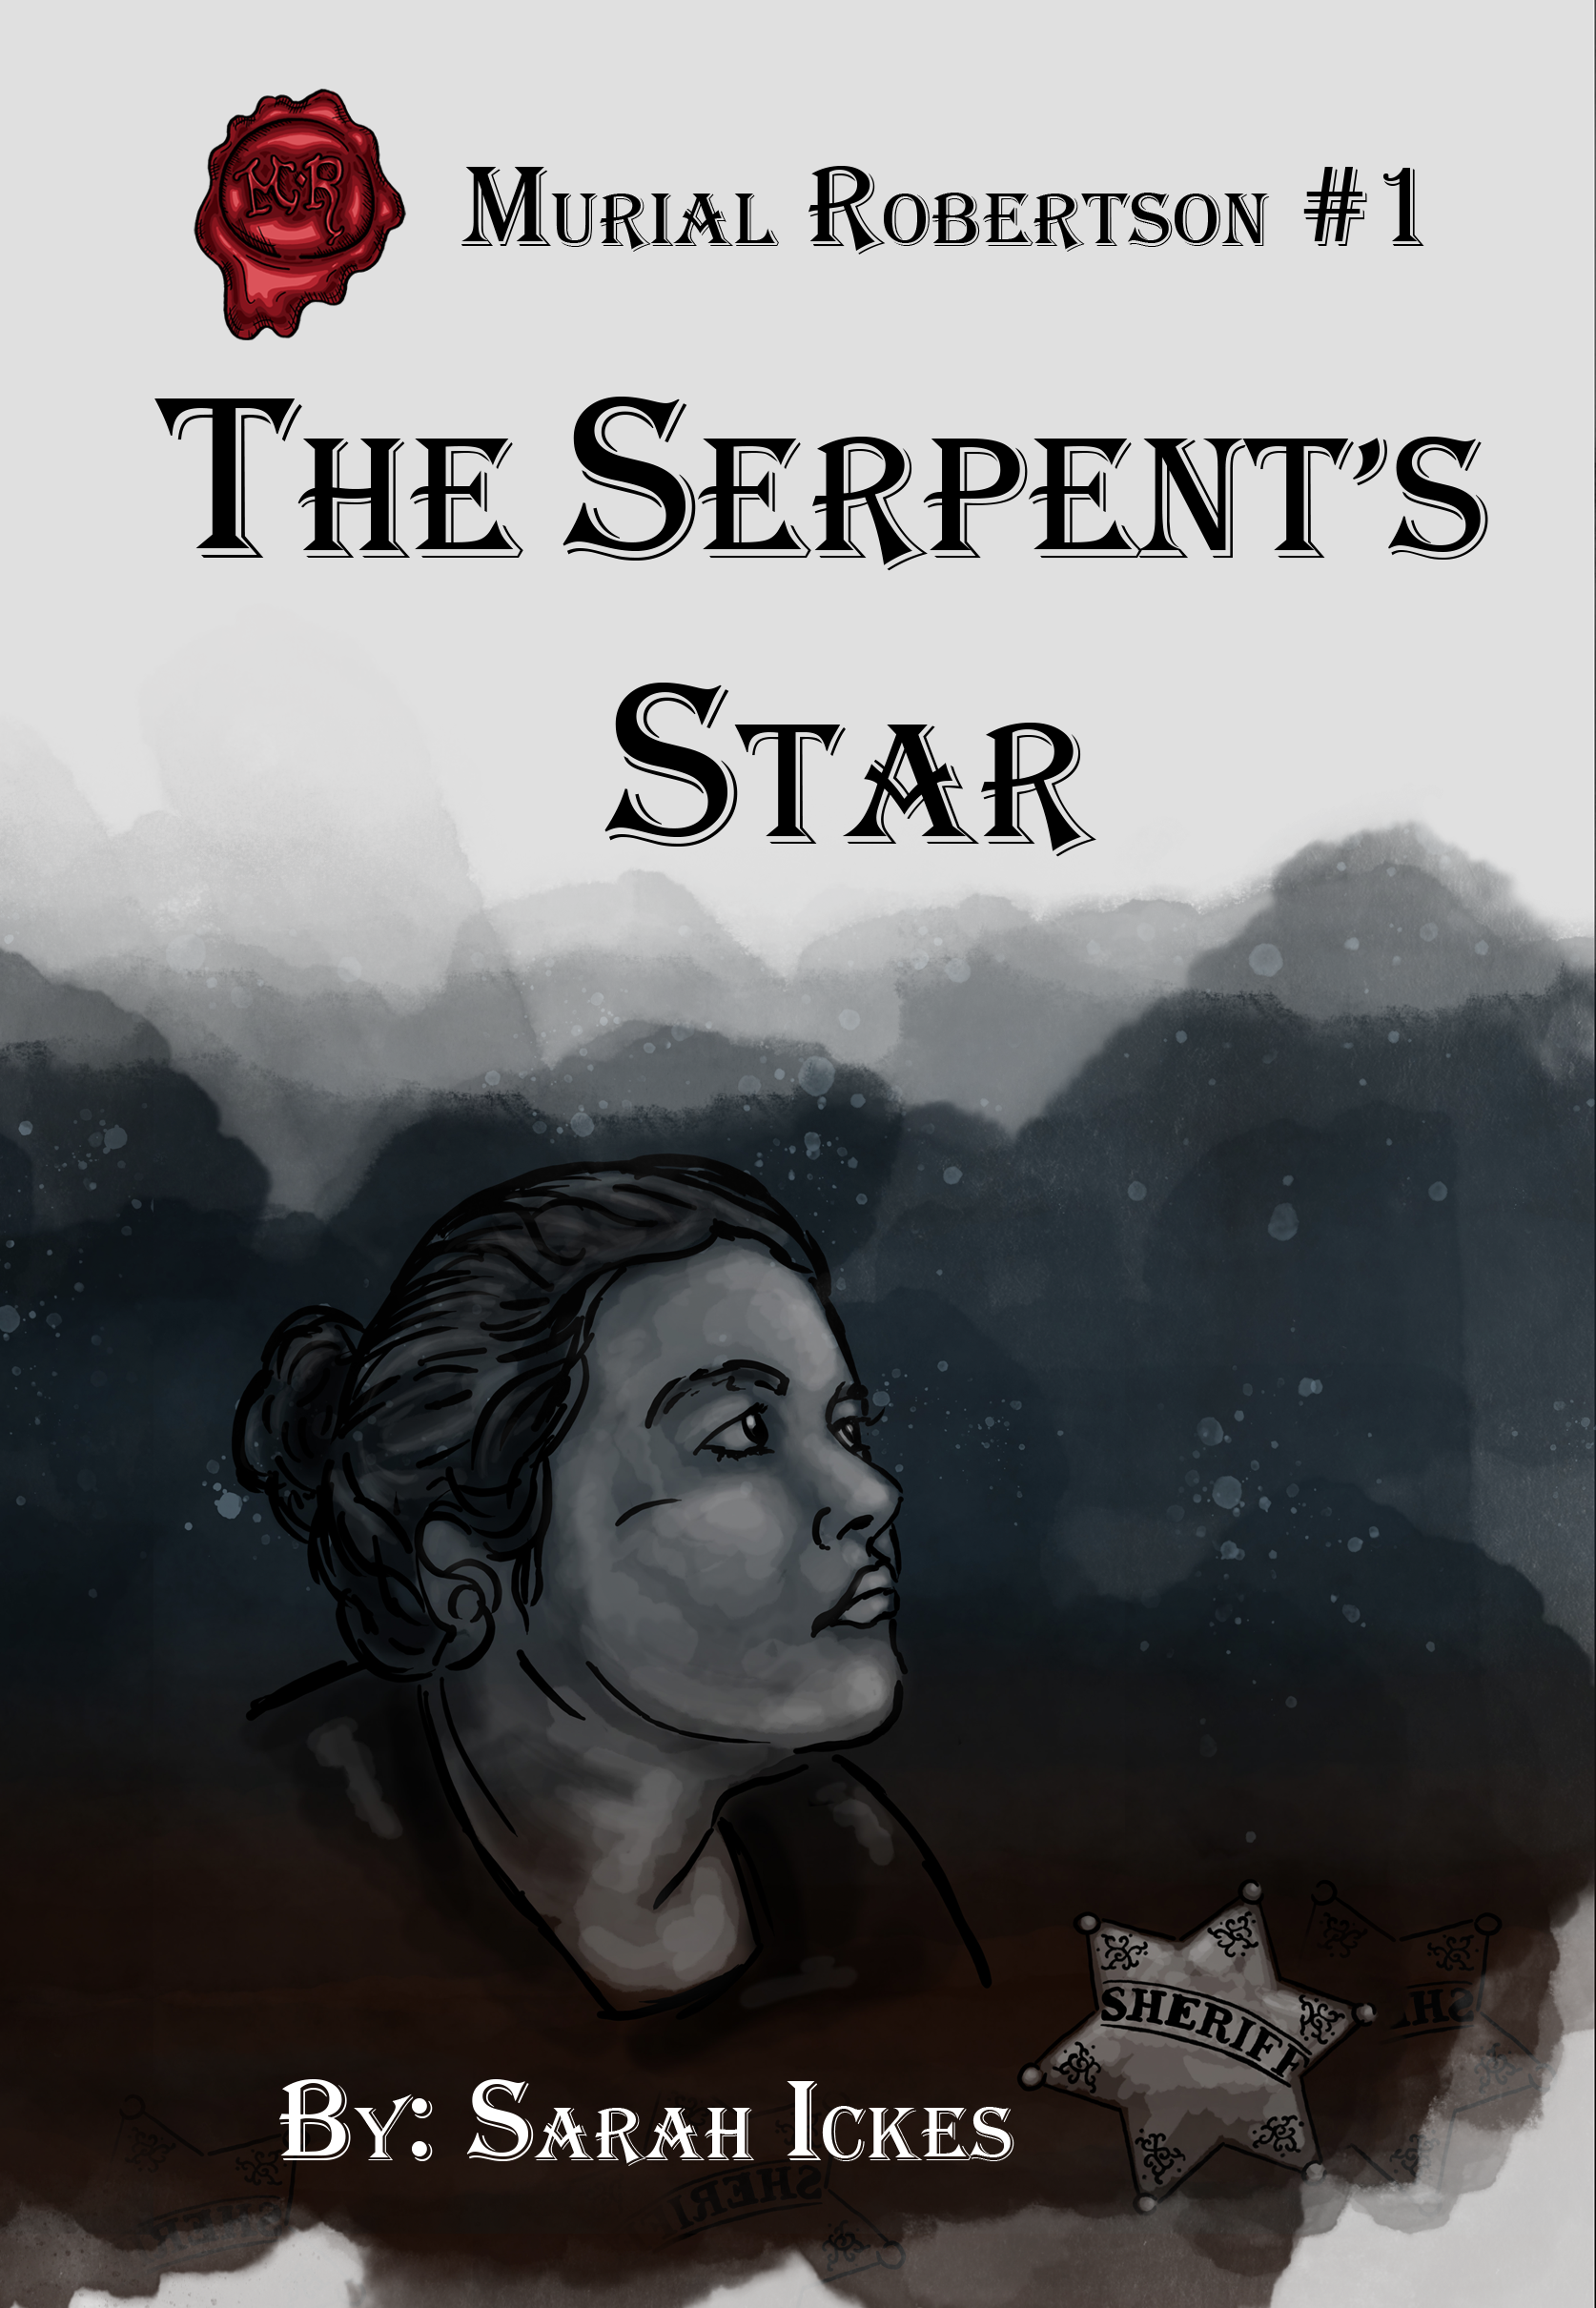 The Serpent's Star by Sarah Ickes